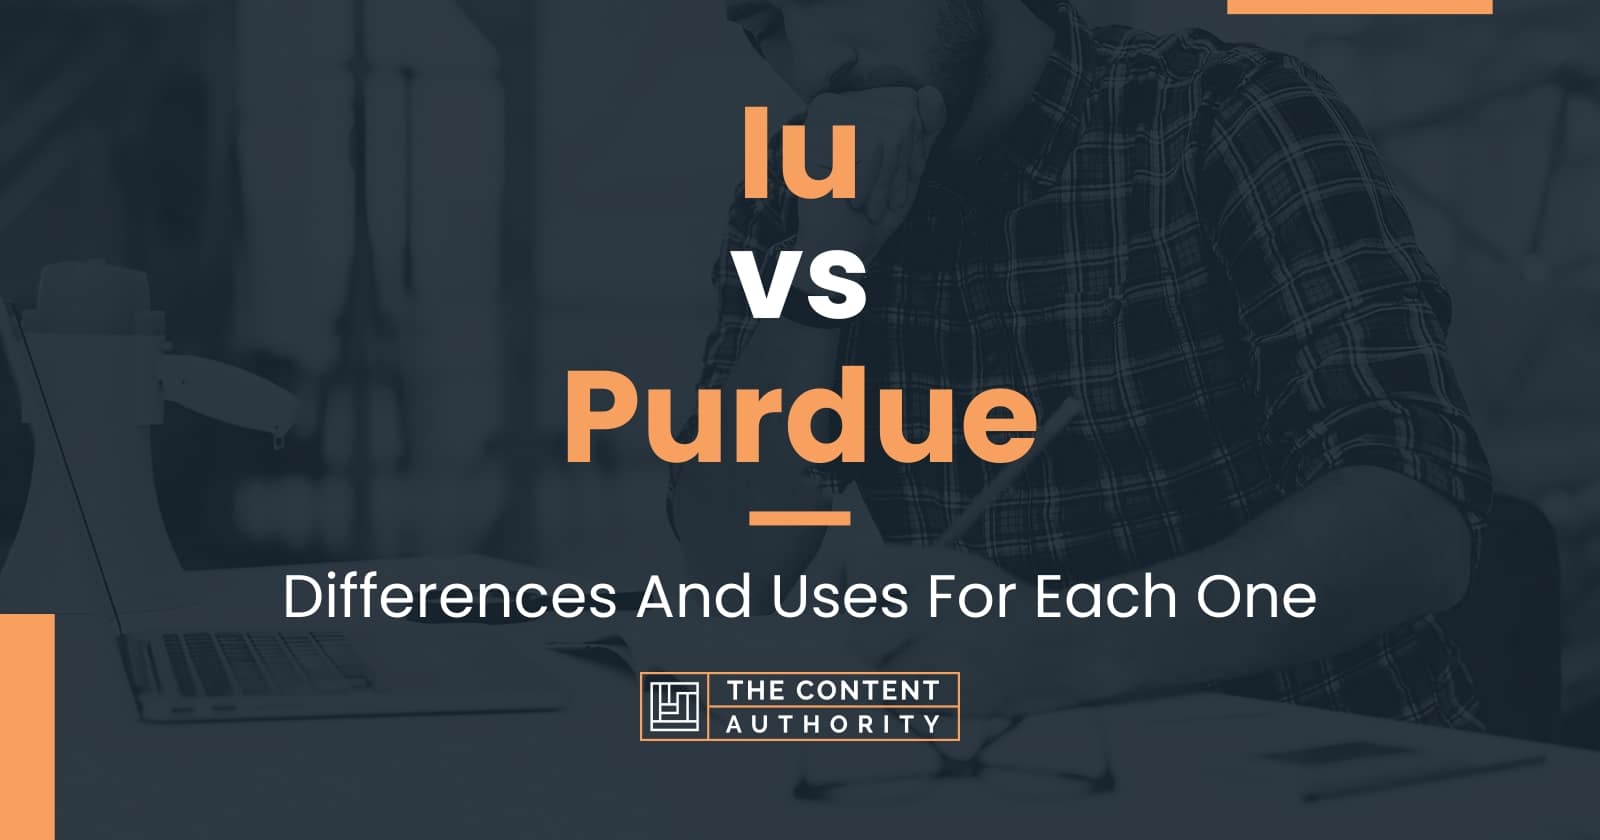 Iu vs Purdue Differences And Uses For Each One